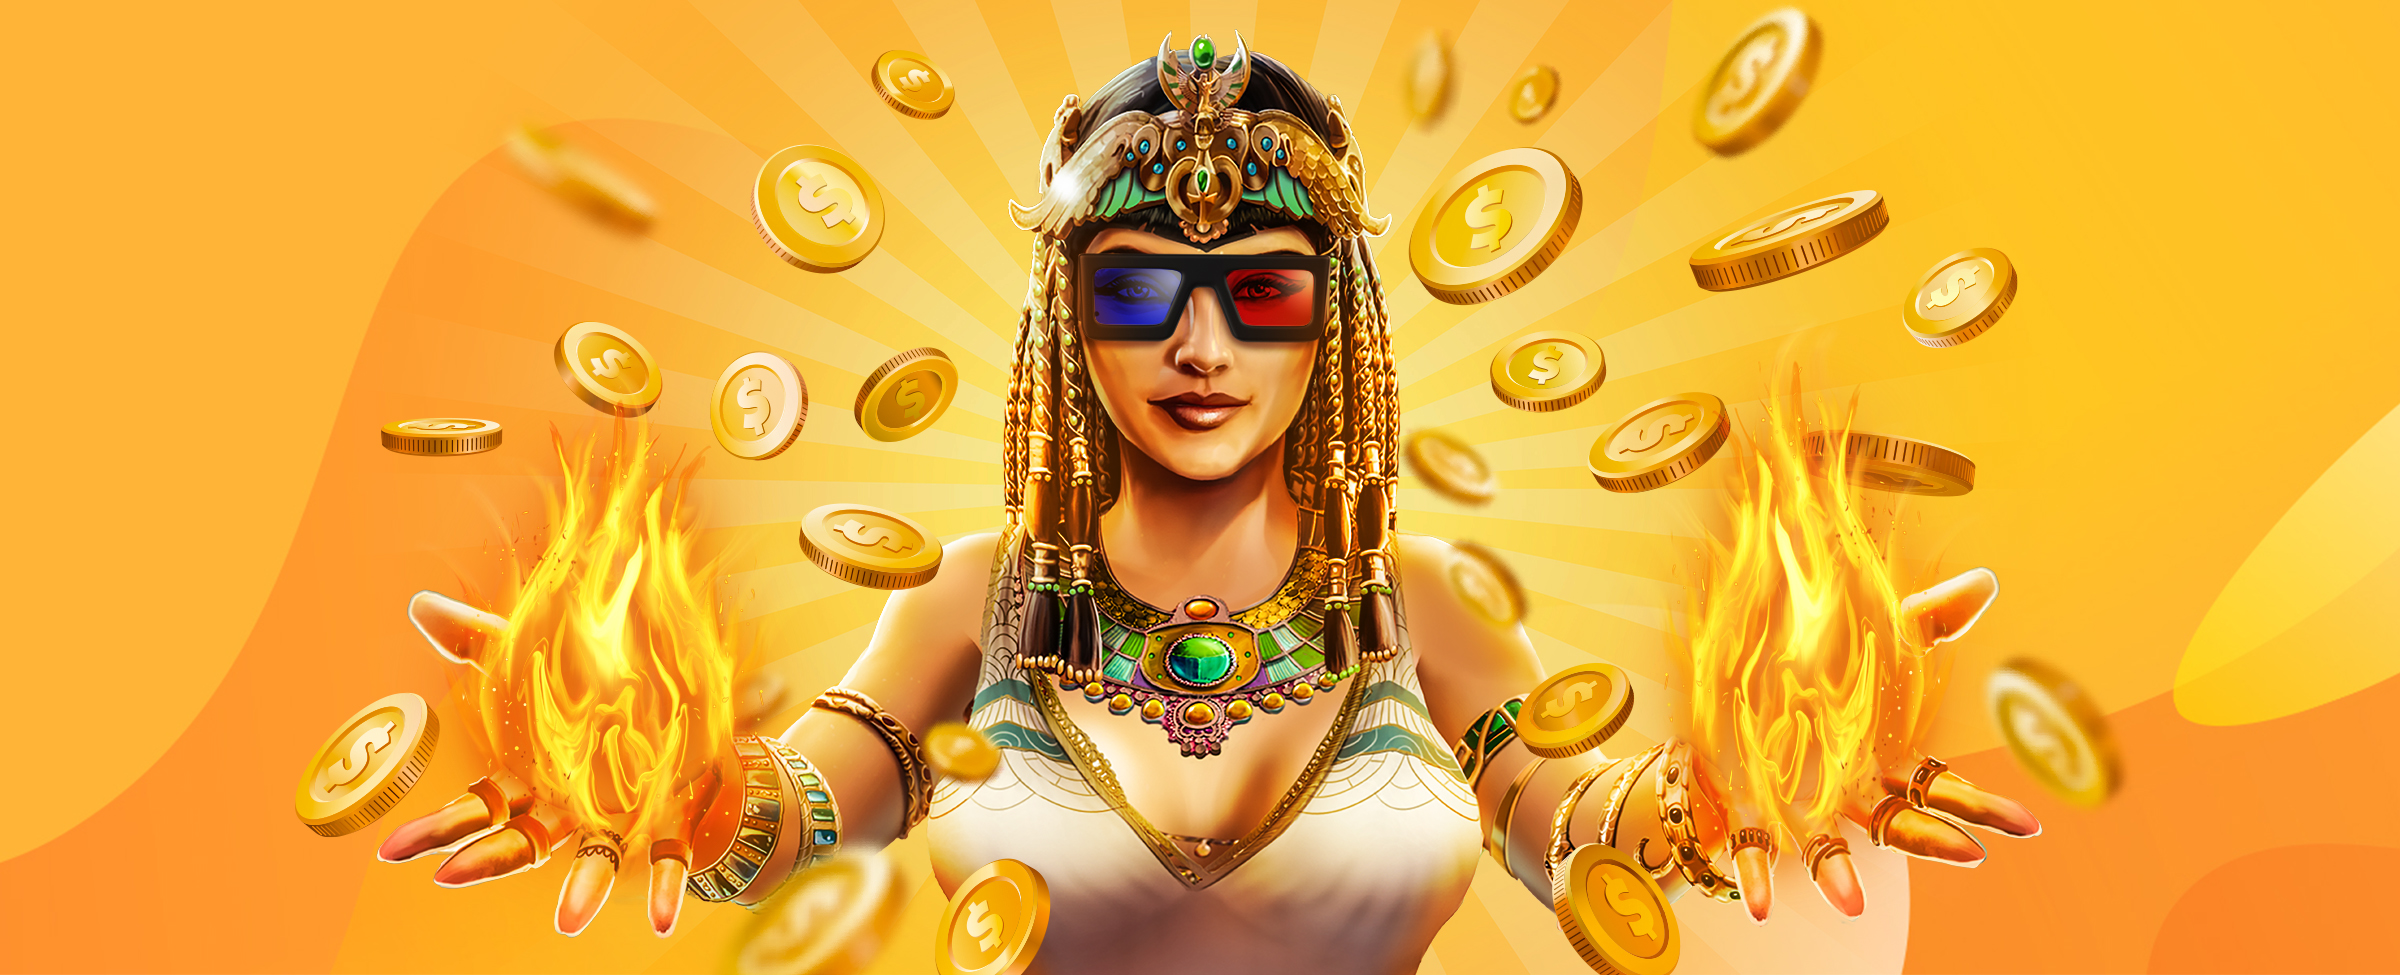 A 3D-animated Cleopatra from the SlotsLV slot game, A Night With Cleo Hot Drop Jackpots, wears an elaborate jewel headpiece and 80s-style red and blue 3D glasses, holding both hands outstretched with fireballs emanating from her palms. Surrounding her is a shower of gold coins, and behind, an abstract multi-tone yellow background.